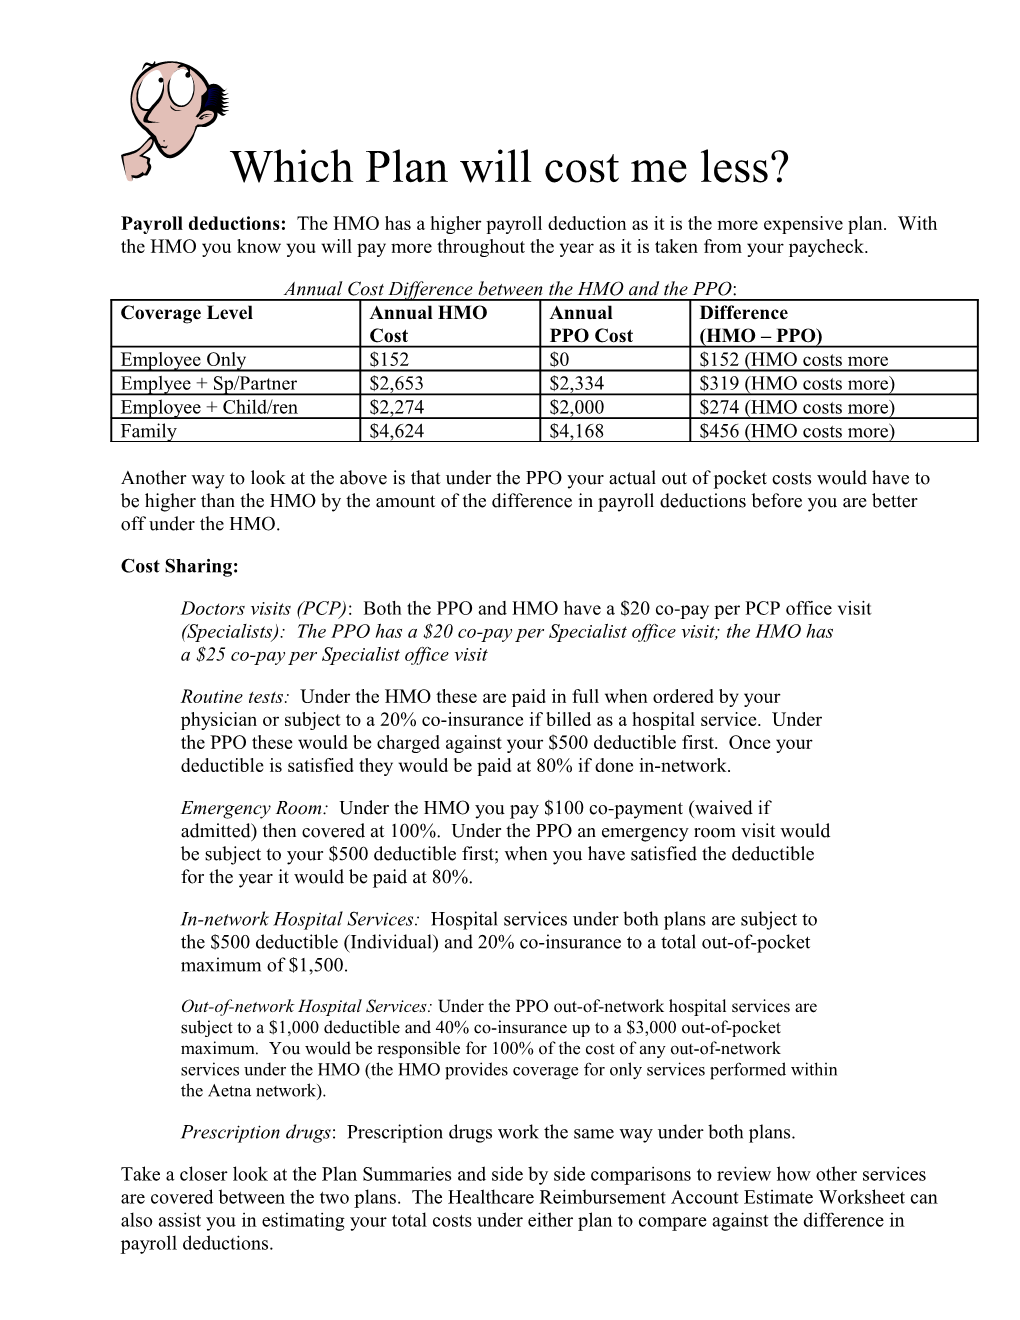 Which Plan Will Cost Me Less